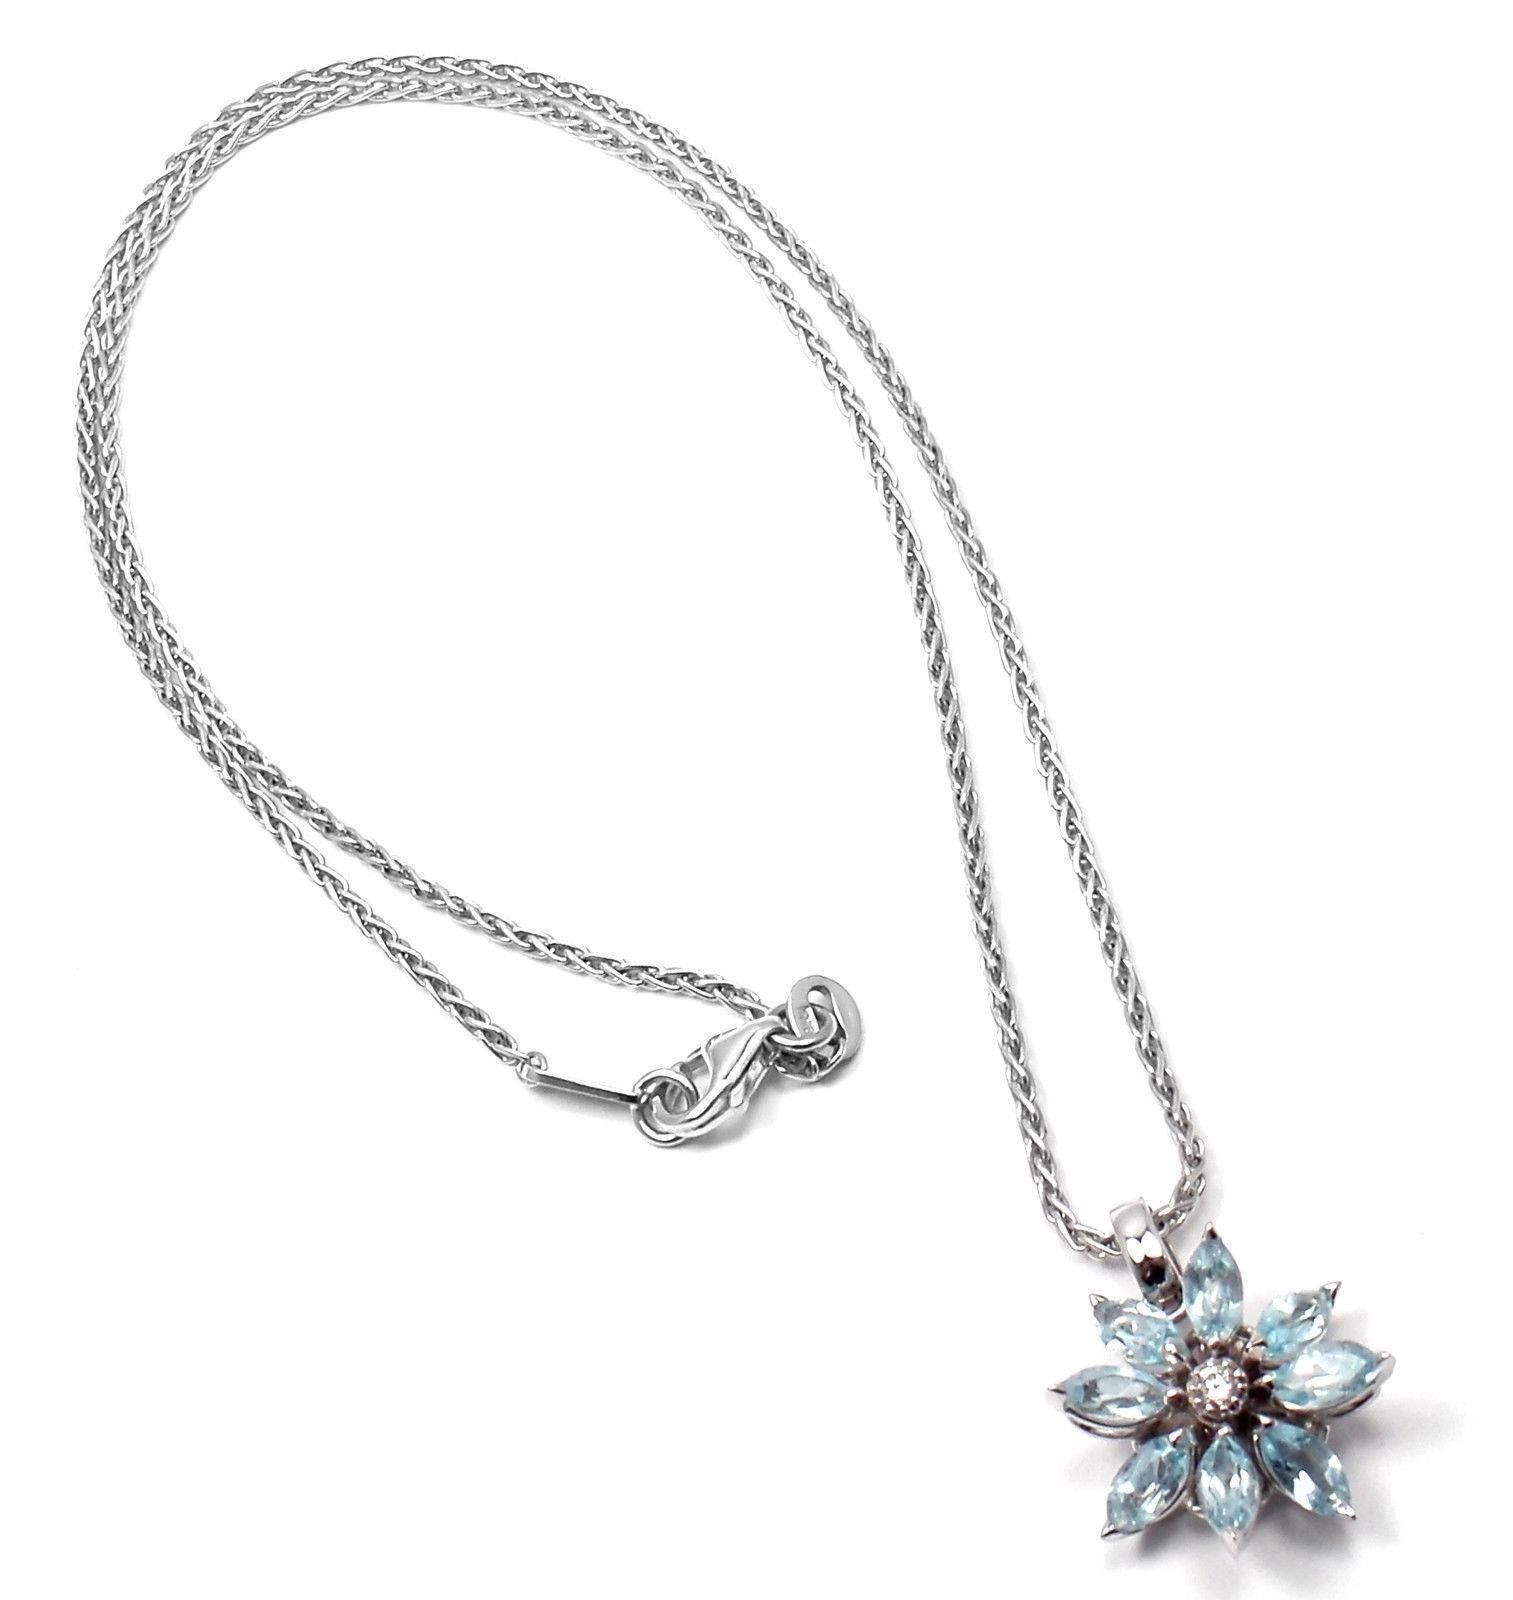 18k White Gold Diamond and Aquamarine Petal Flower Pendant Necklace 
by Asprey.
With marquise shaped aquamarine 5mm each
1 Diamond totaling approximately .20 ctw
Retail Price: $6700.00

Details:
Weight: 8.3 grams
Chain Length: 16"
Pendant: 